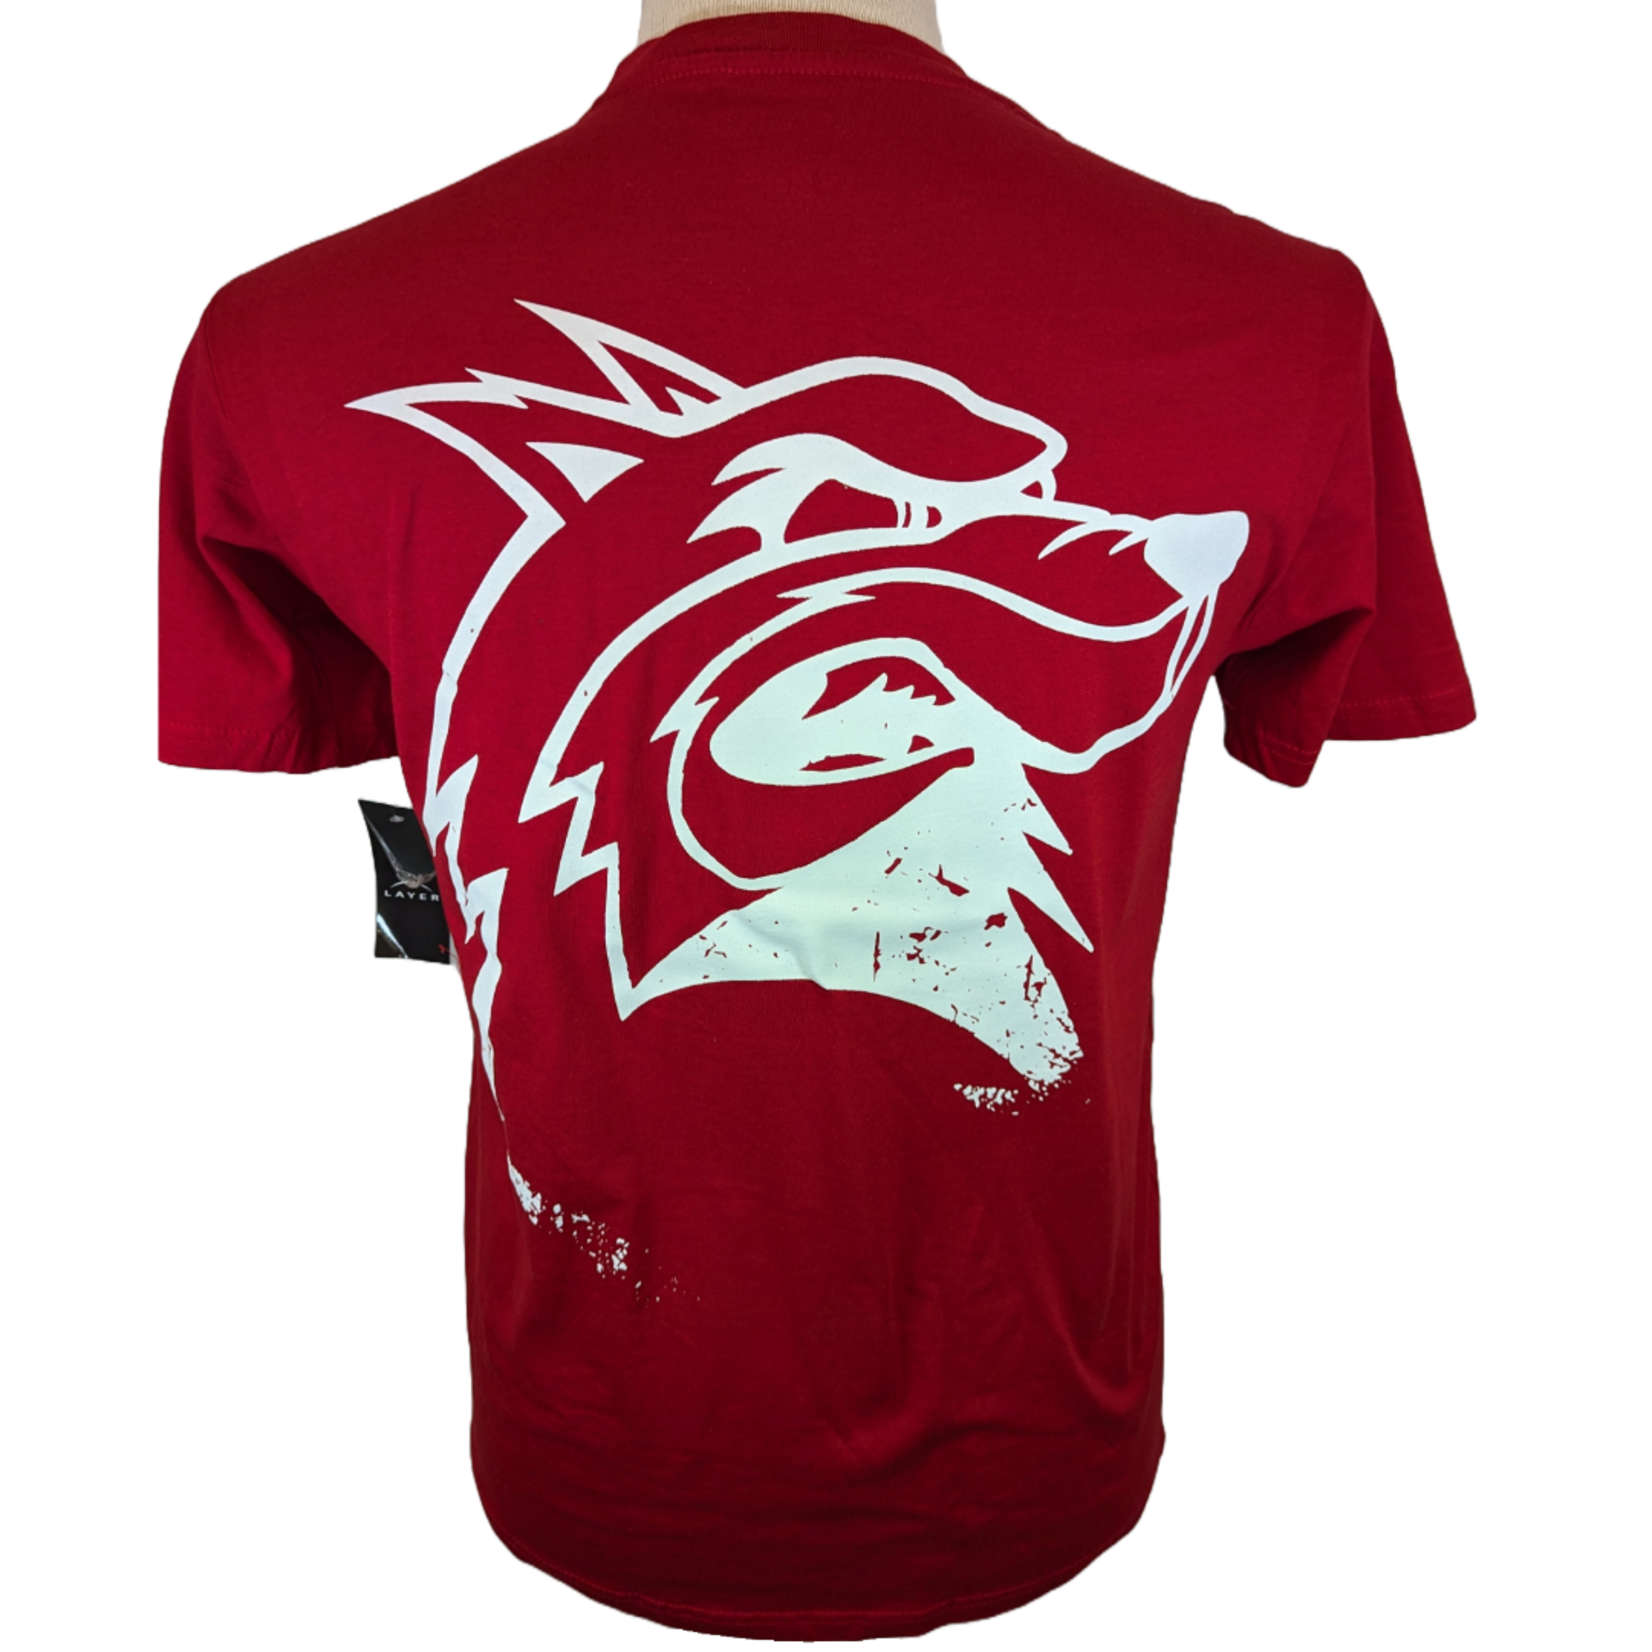 Home of the Seawolves Tee